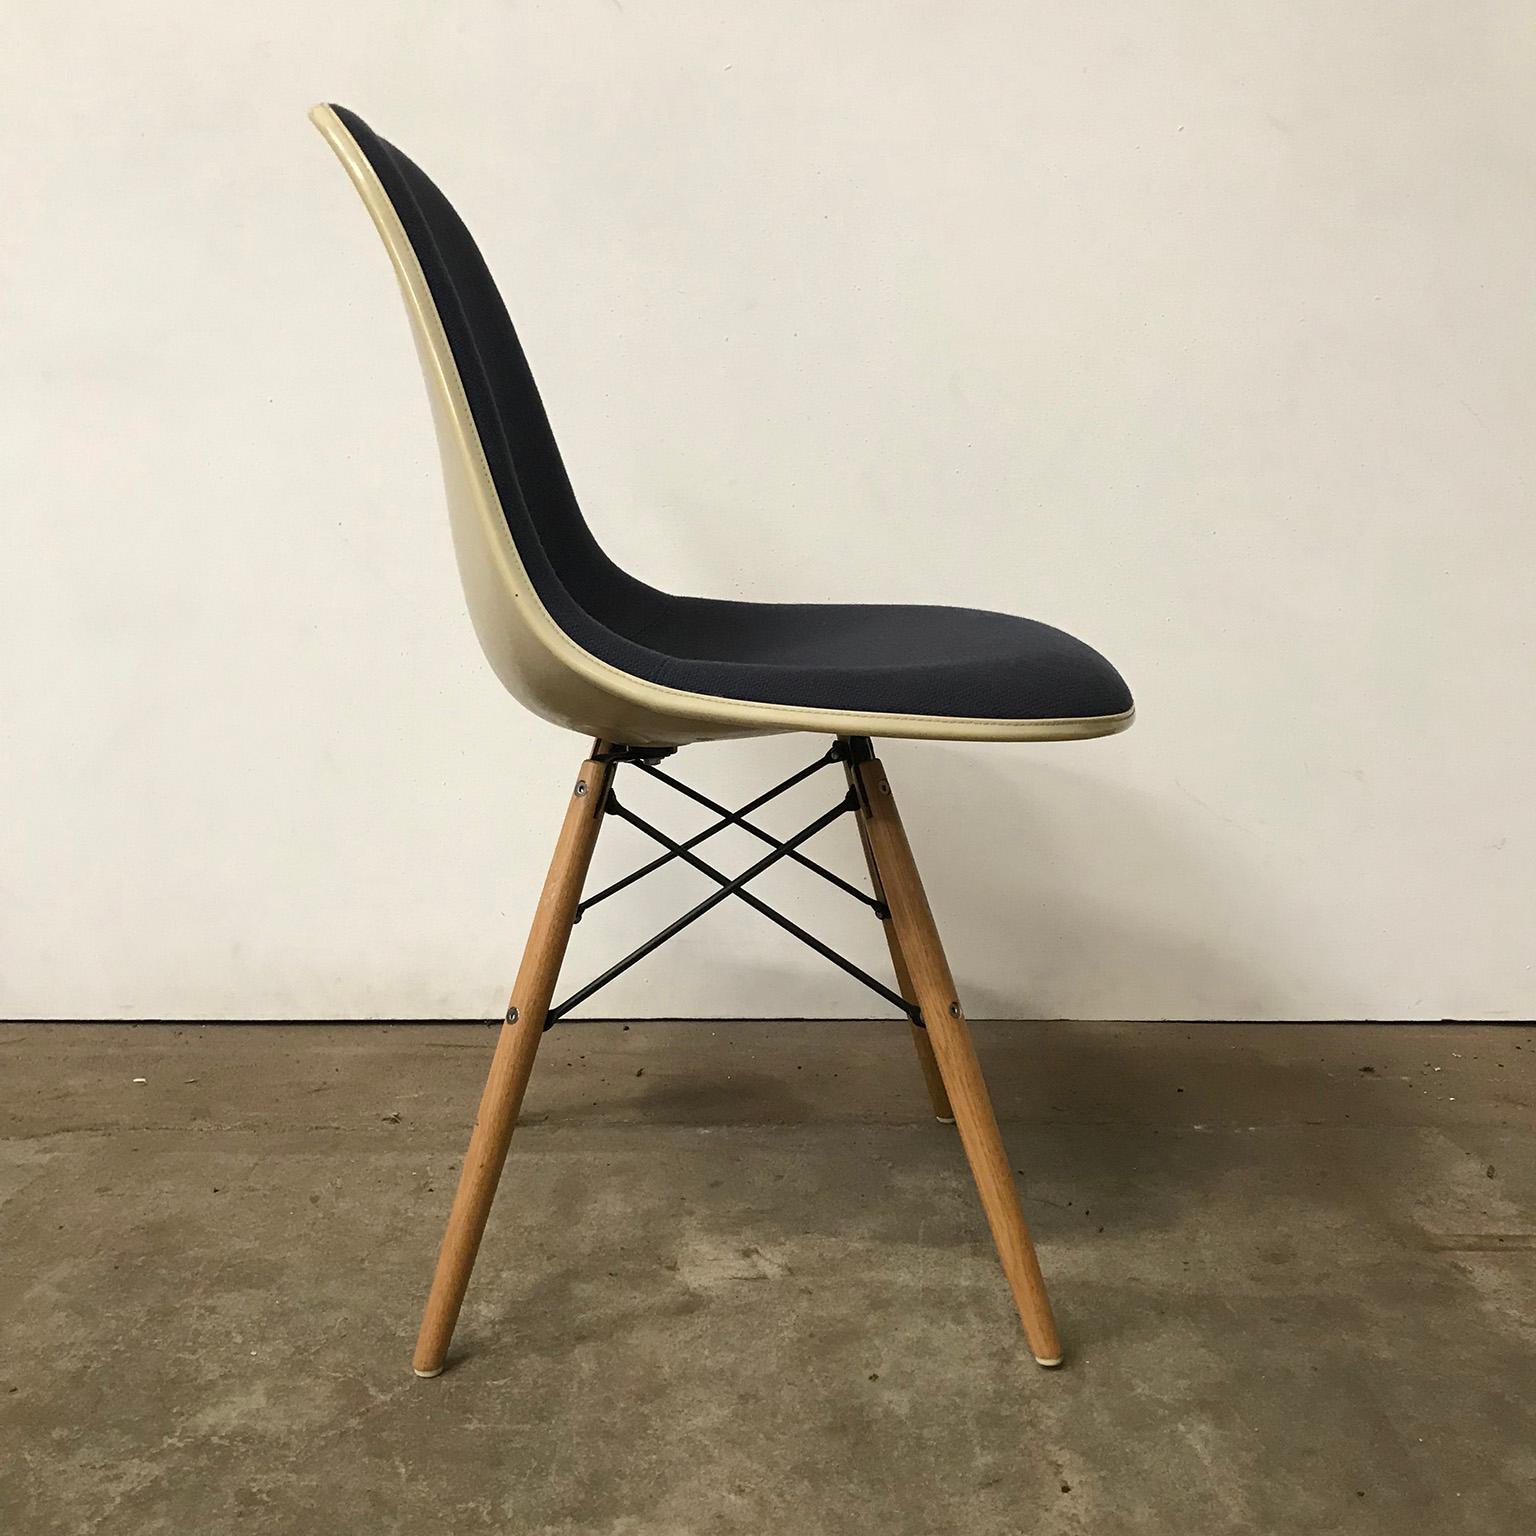 Shell with Lavander purple upholstery with beech wooden dowel base with black wire. The shell is by Herman Miller, Vitra (picture #16). The upholstery is good except for two darker spots (#14 and #15). The wooden legs show traces of wear like some